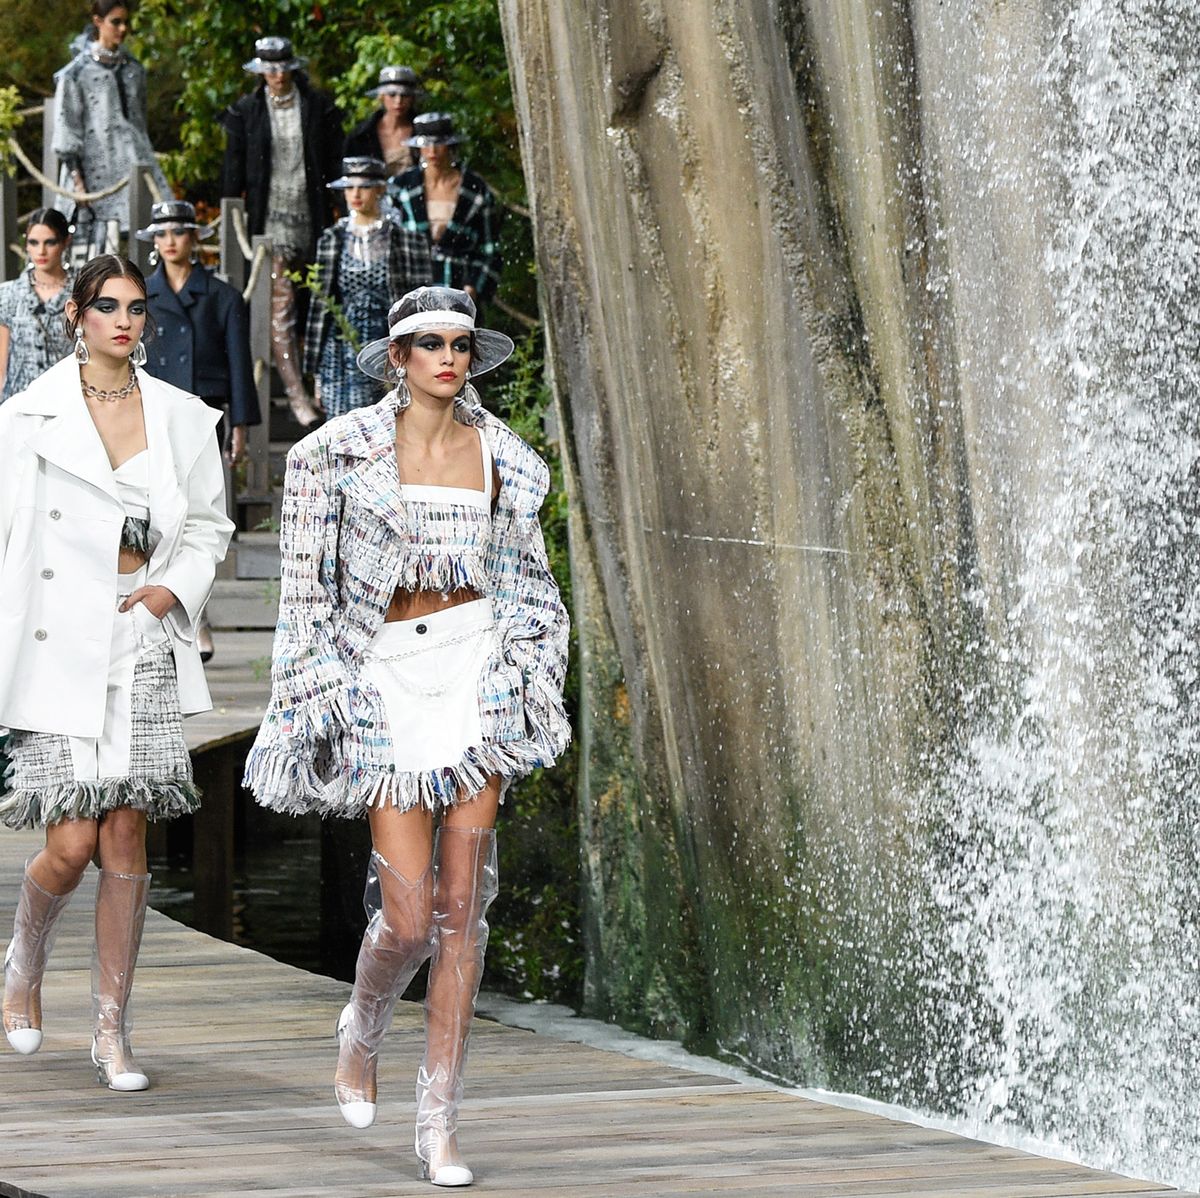 Chanel's Next Runway Show Will Be in Karl Lagerfeld's Hometown